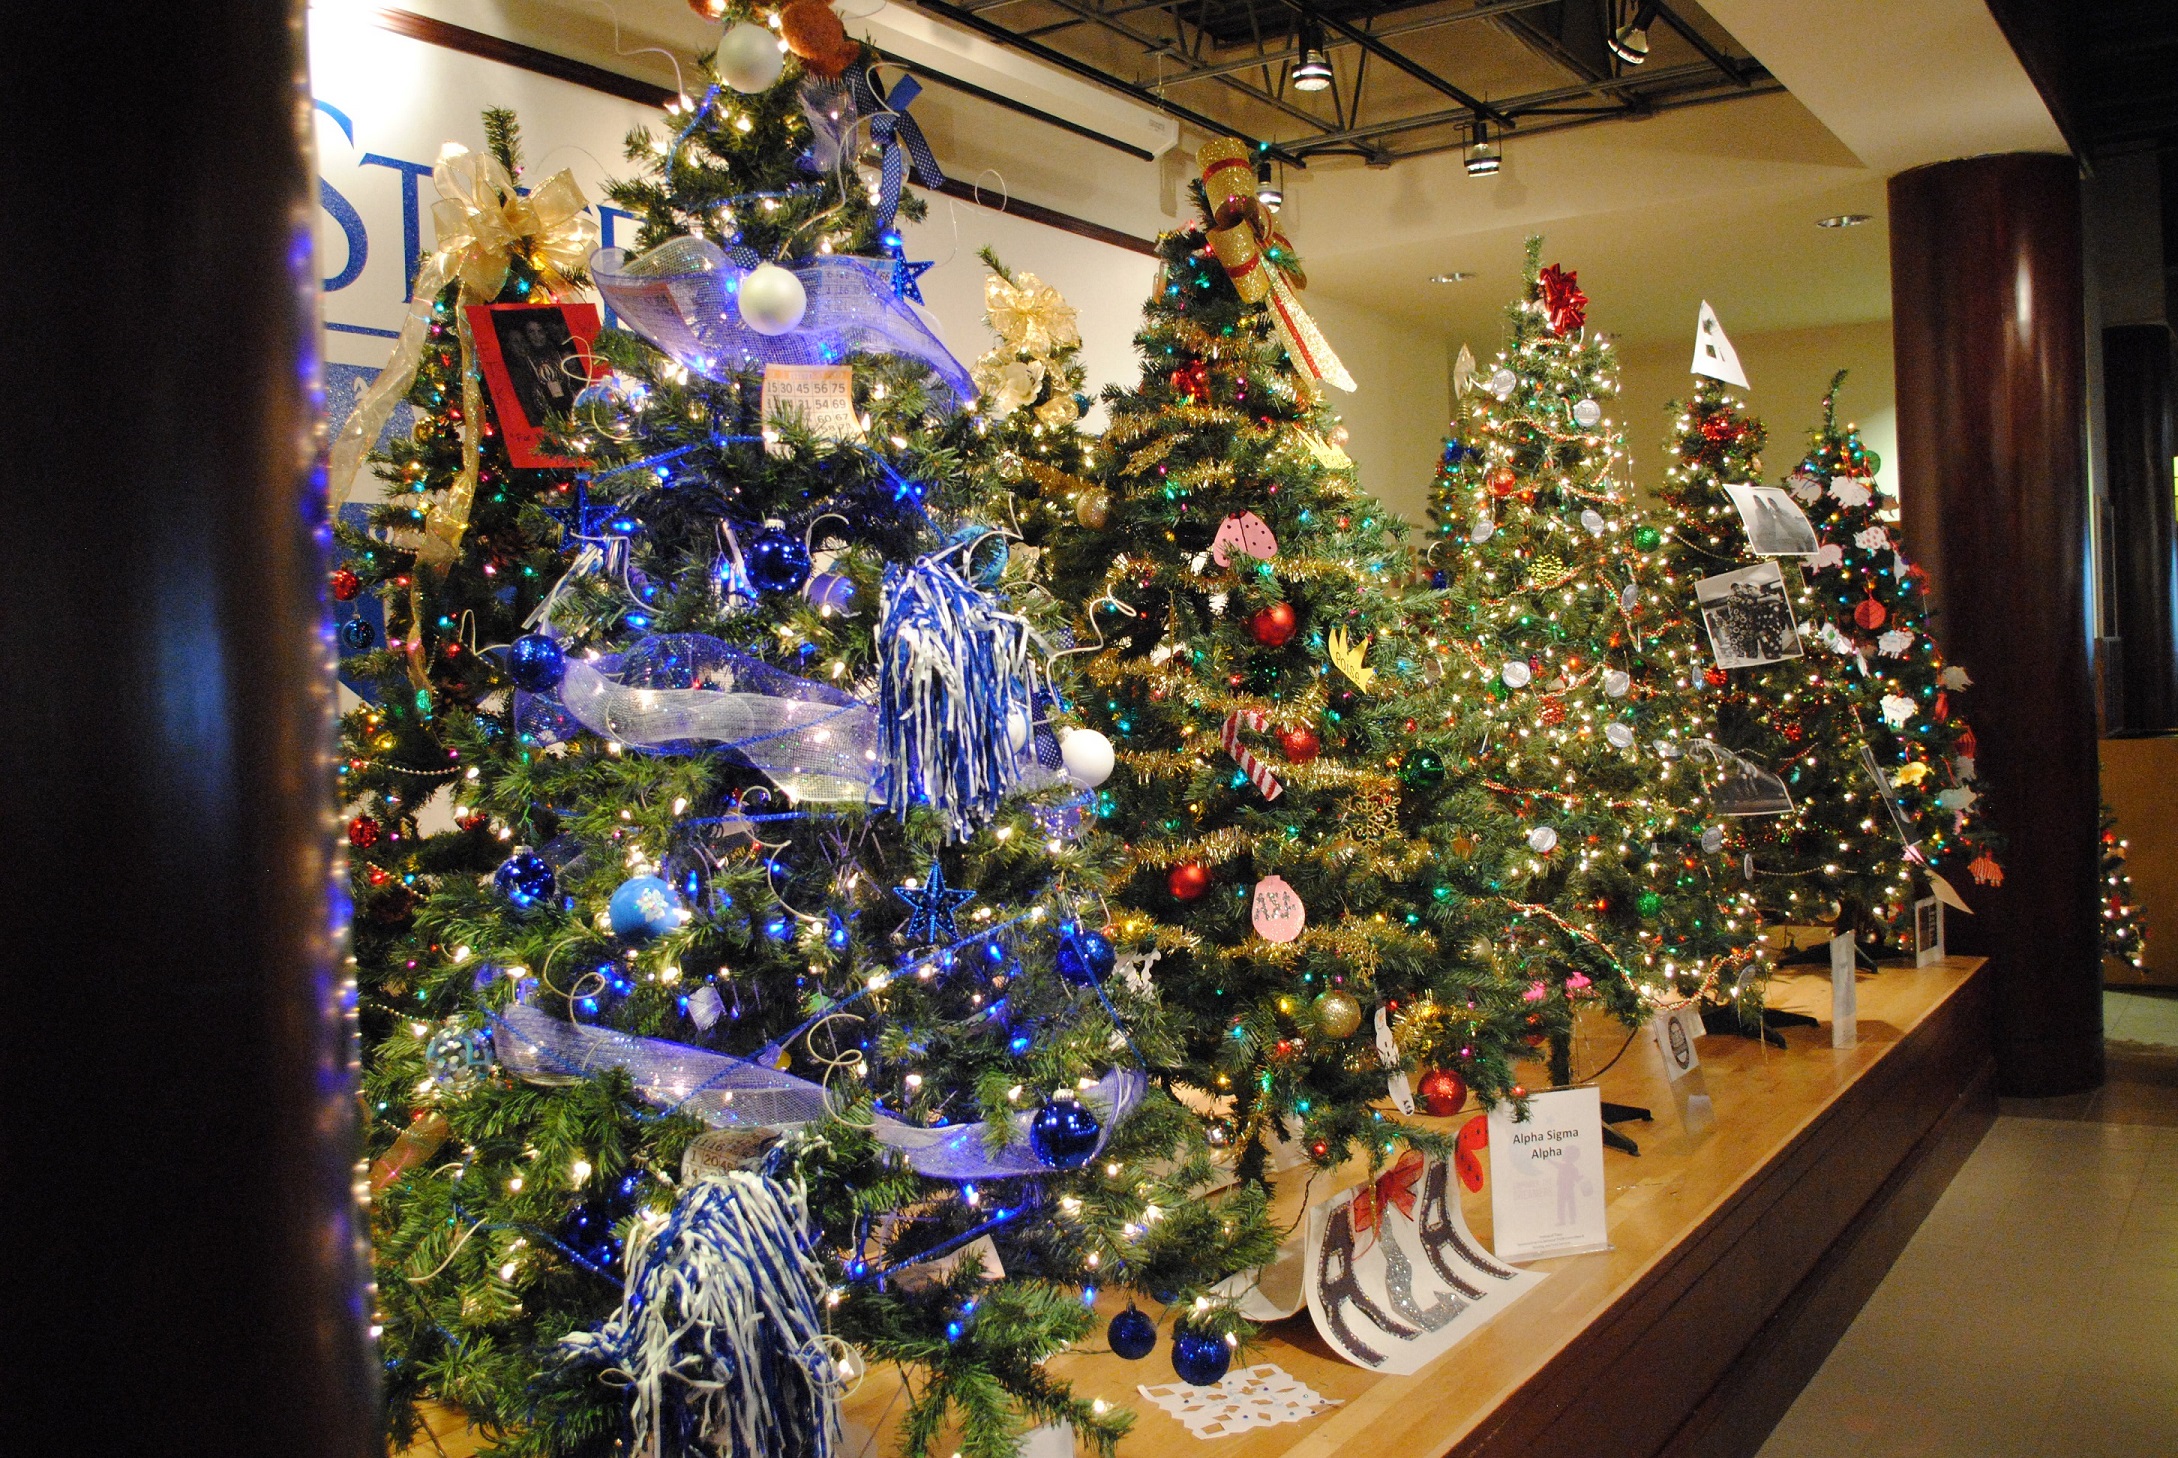 Twelve student groups have designed trees as part of the Penn State Behrend Festival of Trees.